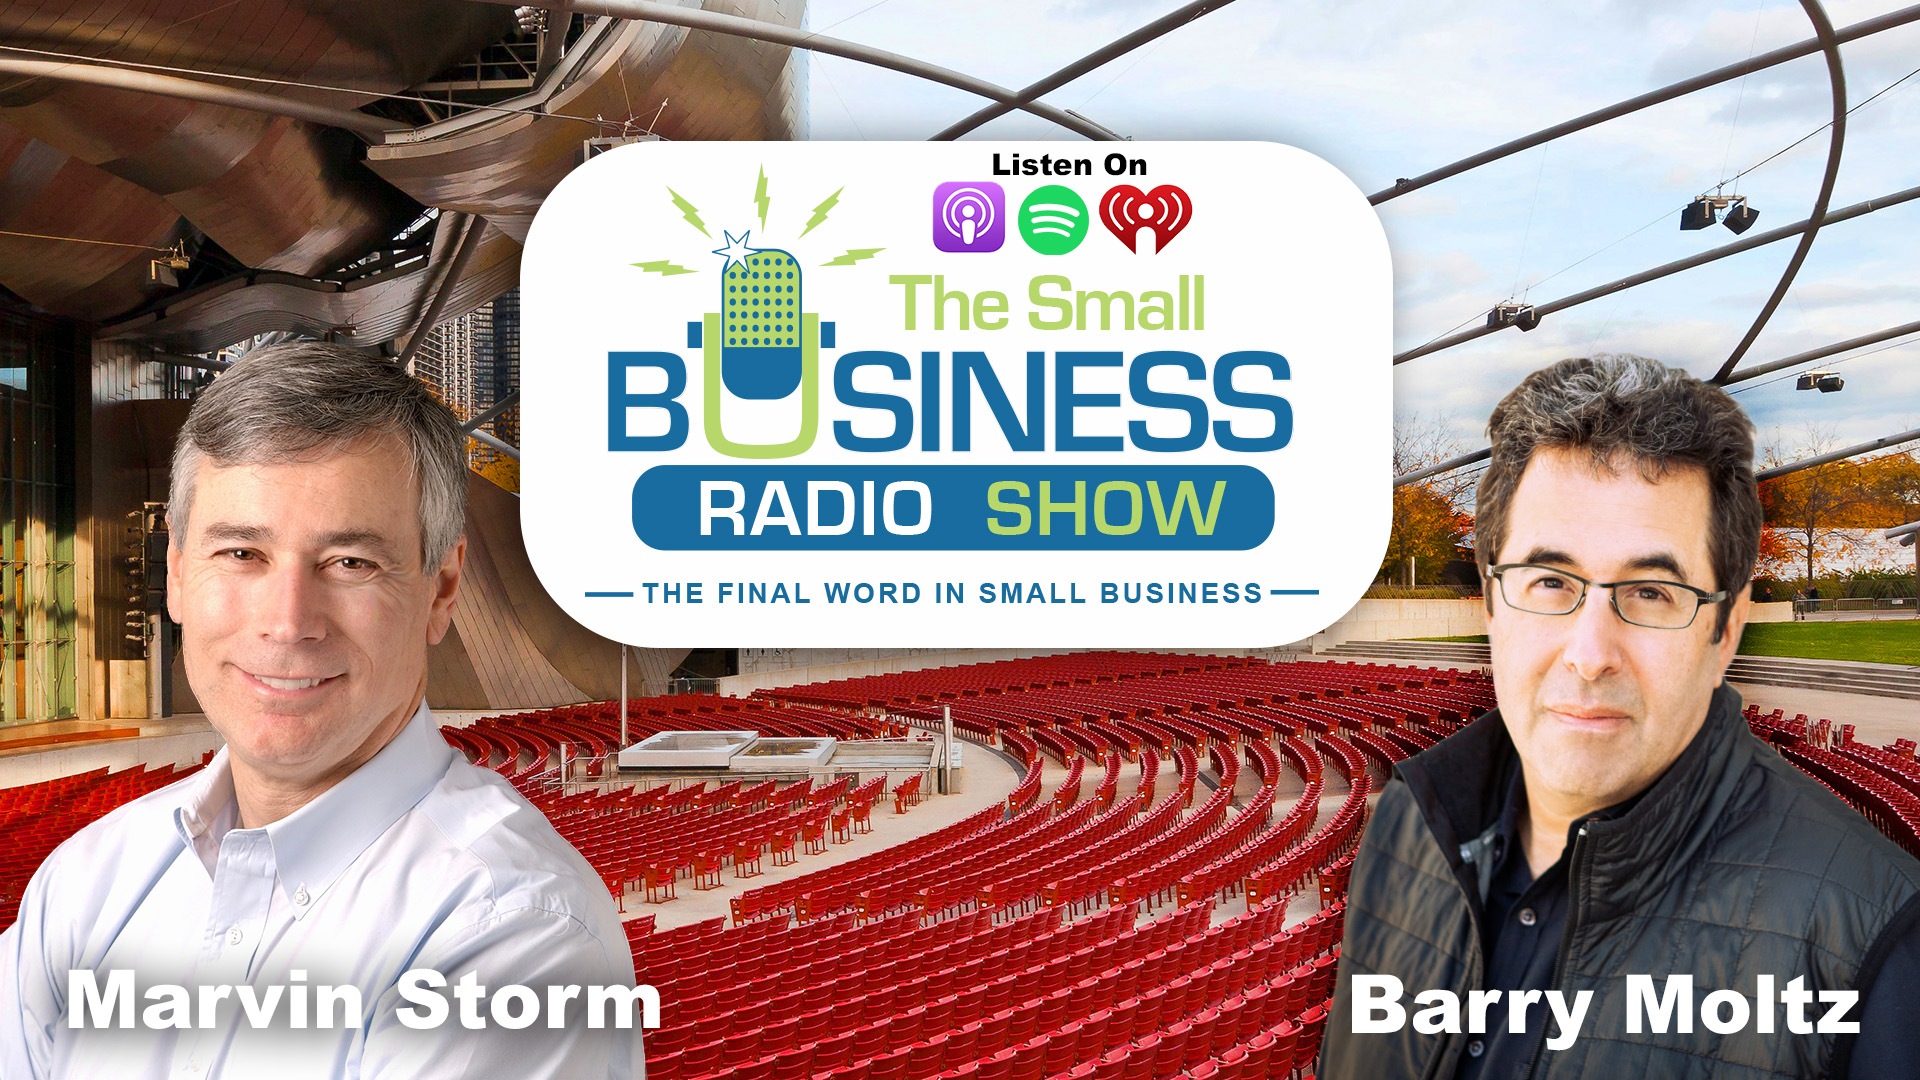 Marvin Storm on The Small Business Radio Show